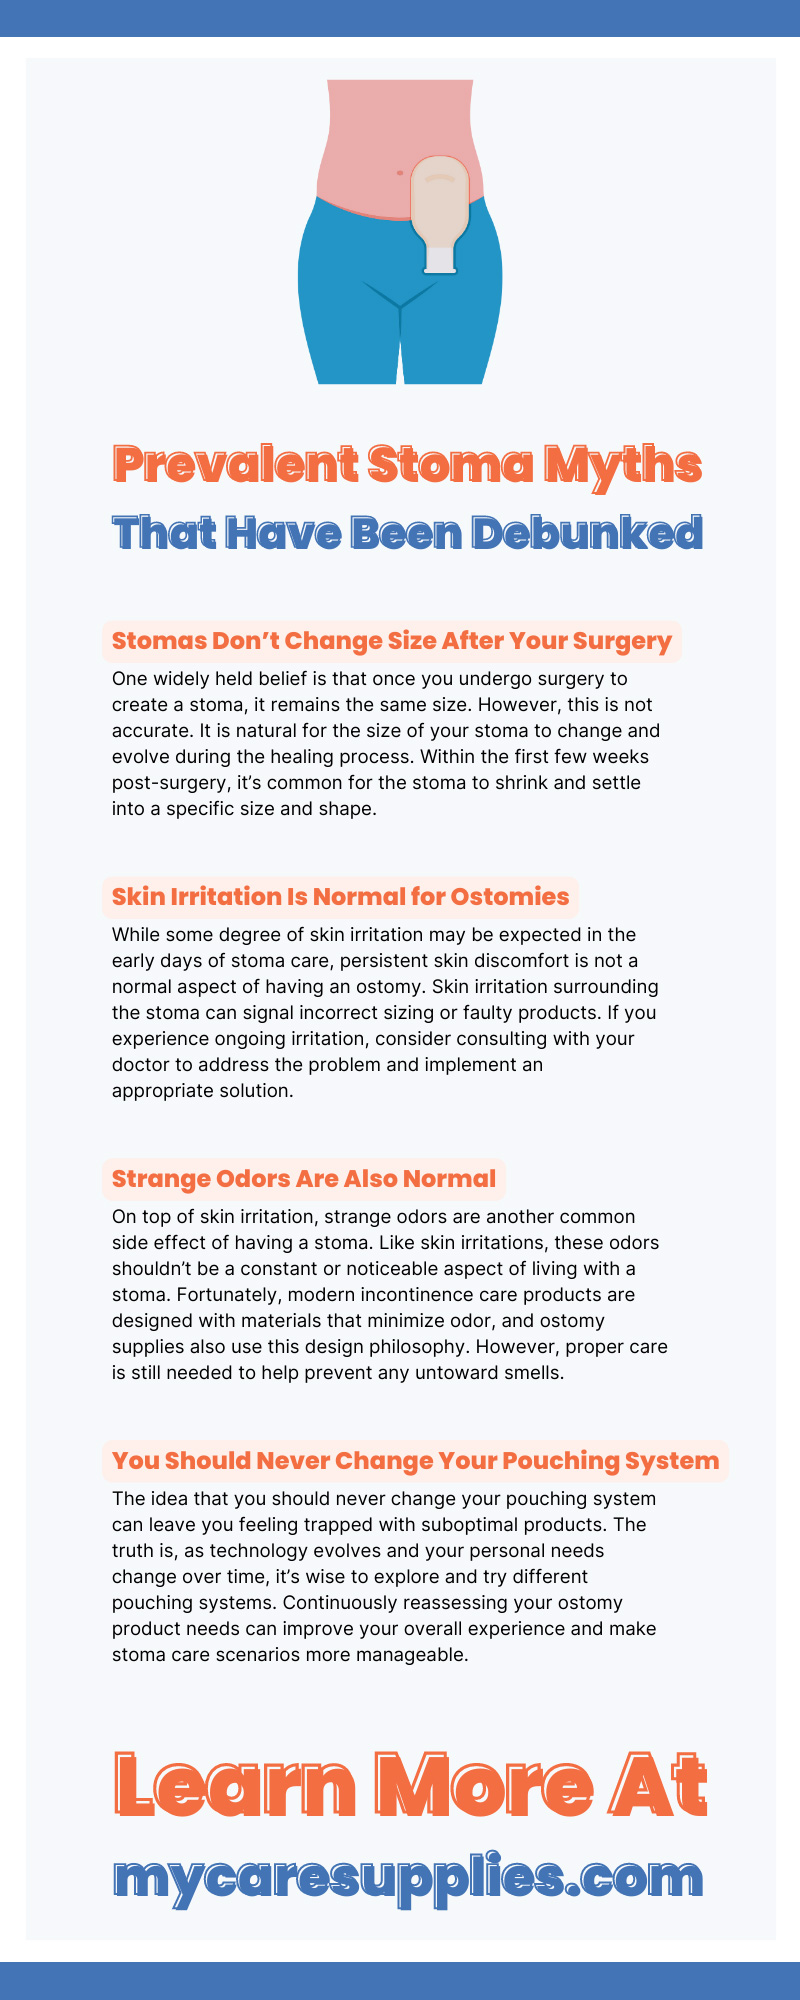 Prevalent Stoma Myths That Have Been Debunked